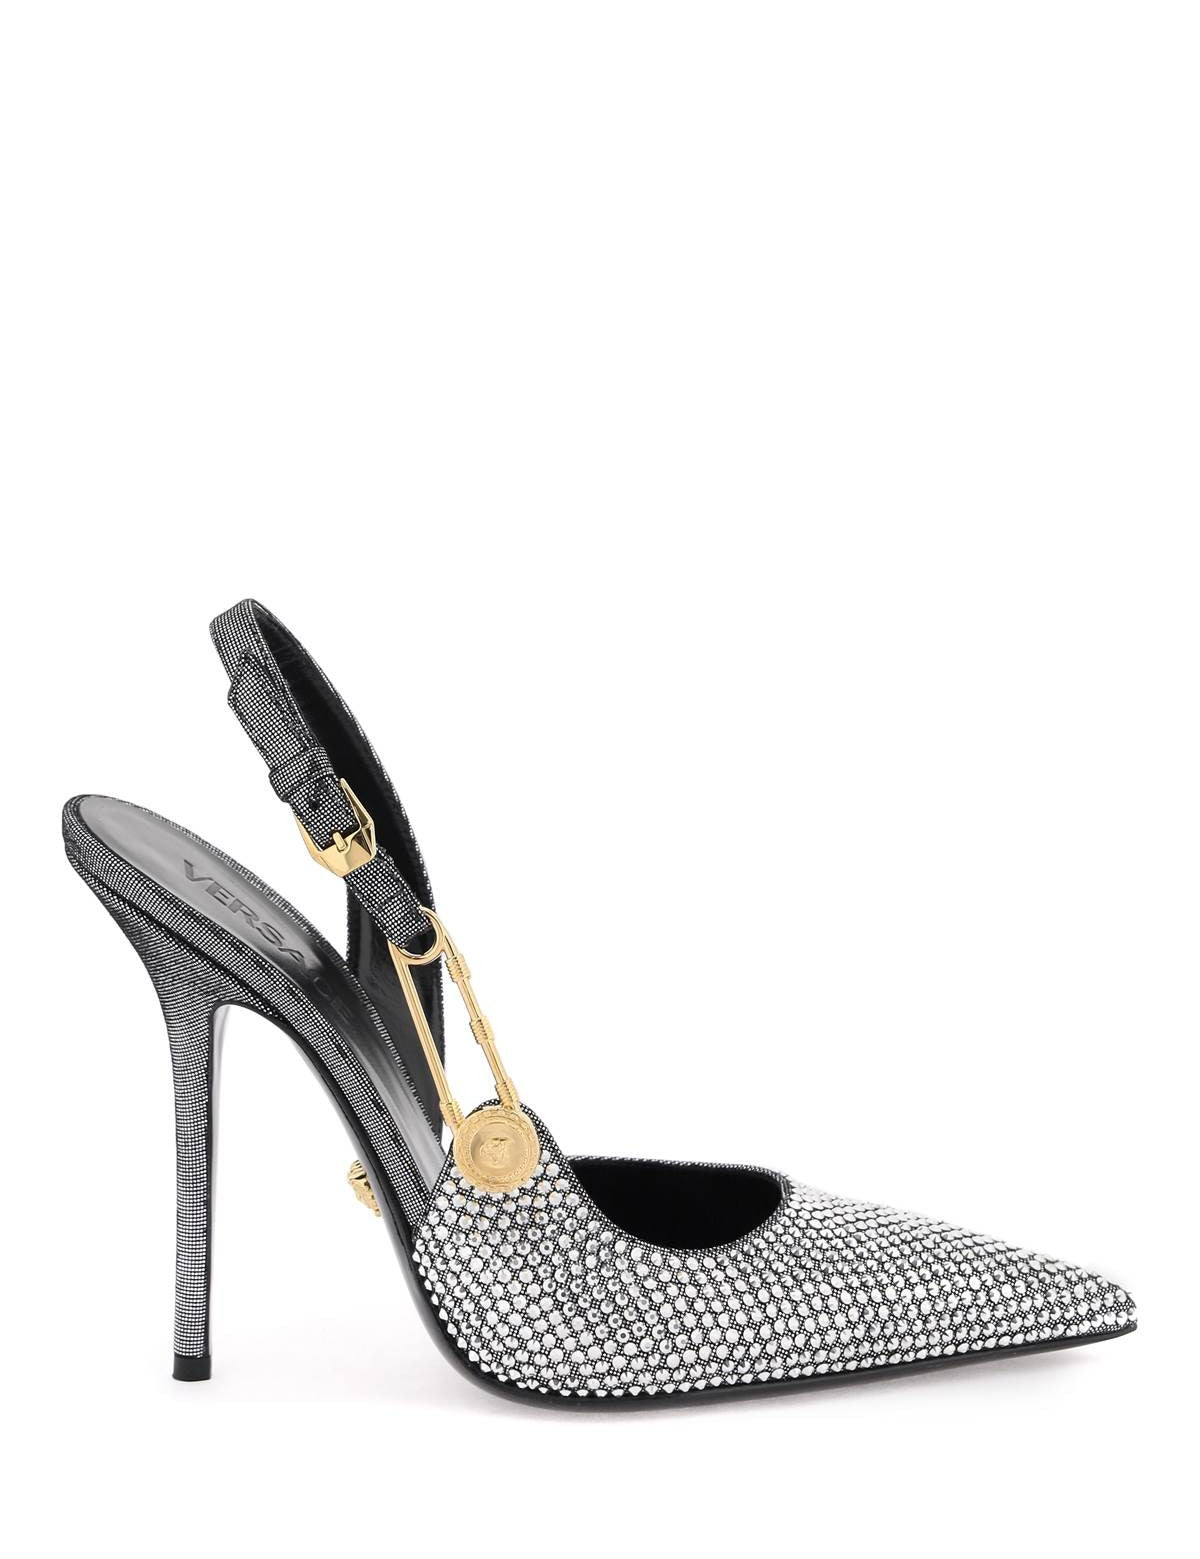 versace-rhinestone-slingback-pumps-with-safety-pin-detail.jpg